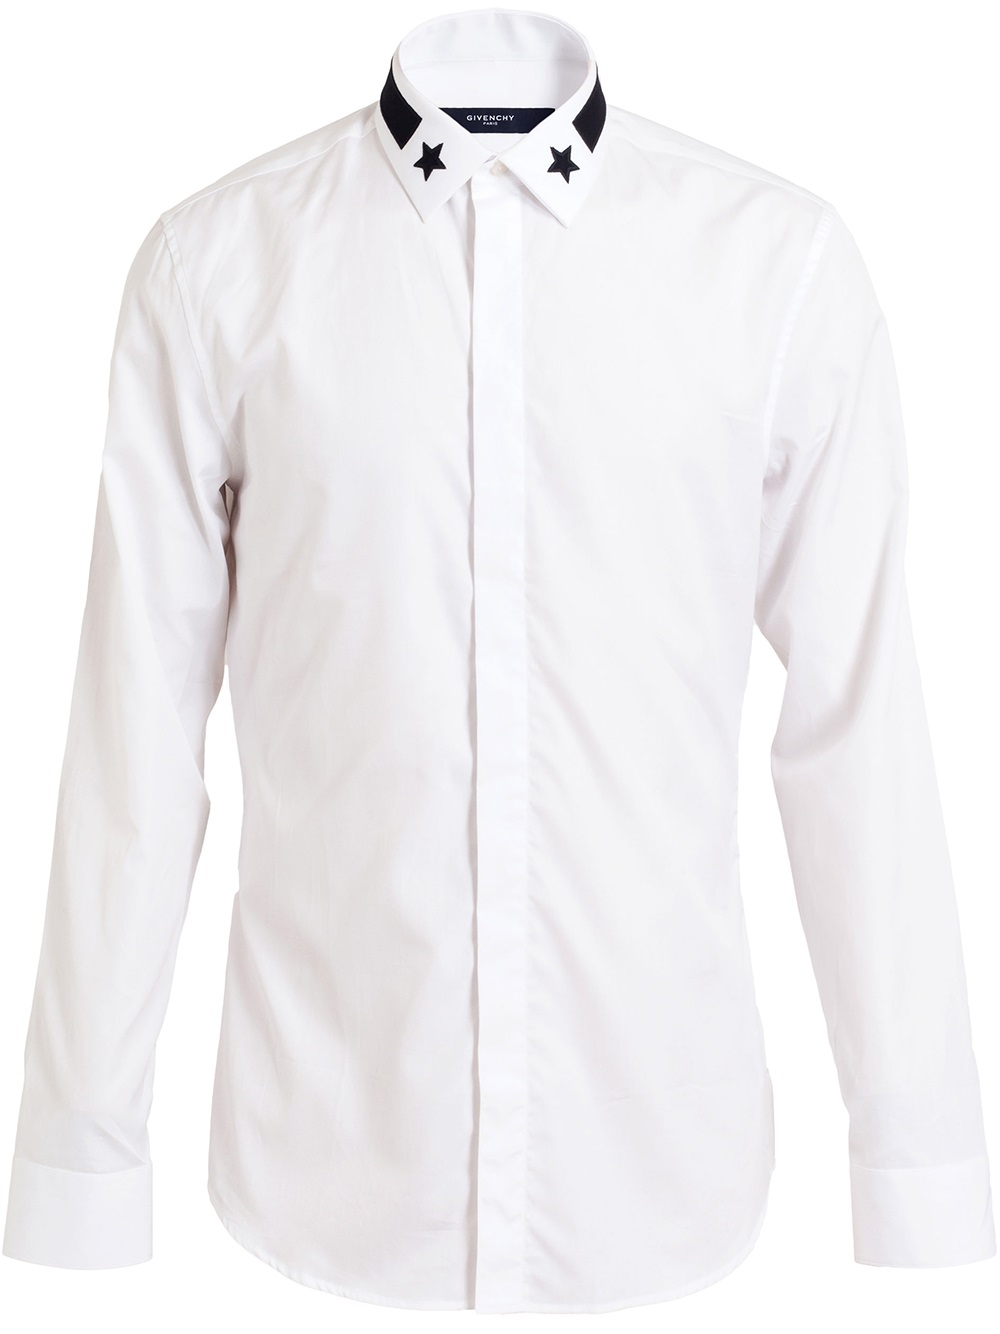 givenchy star embroidered shirt